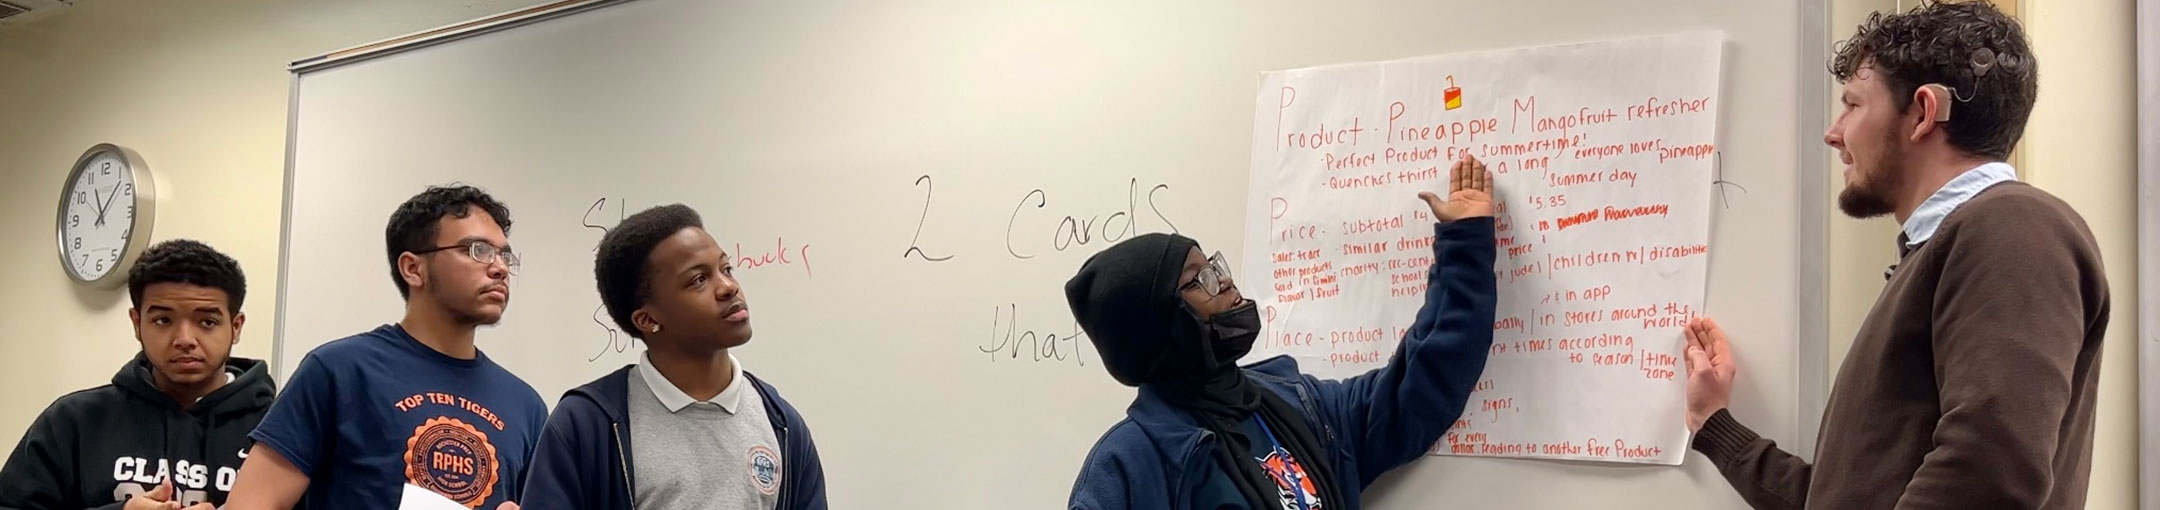 a professor and students working on a whiteboard